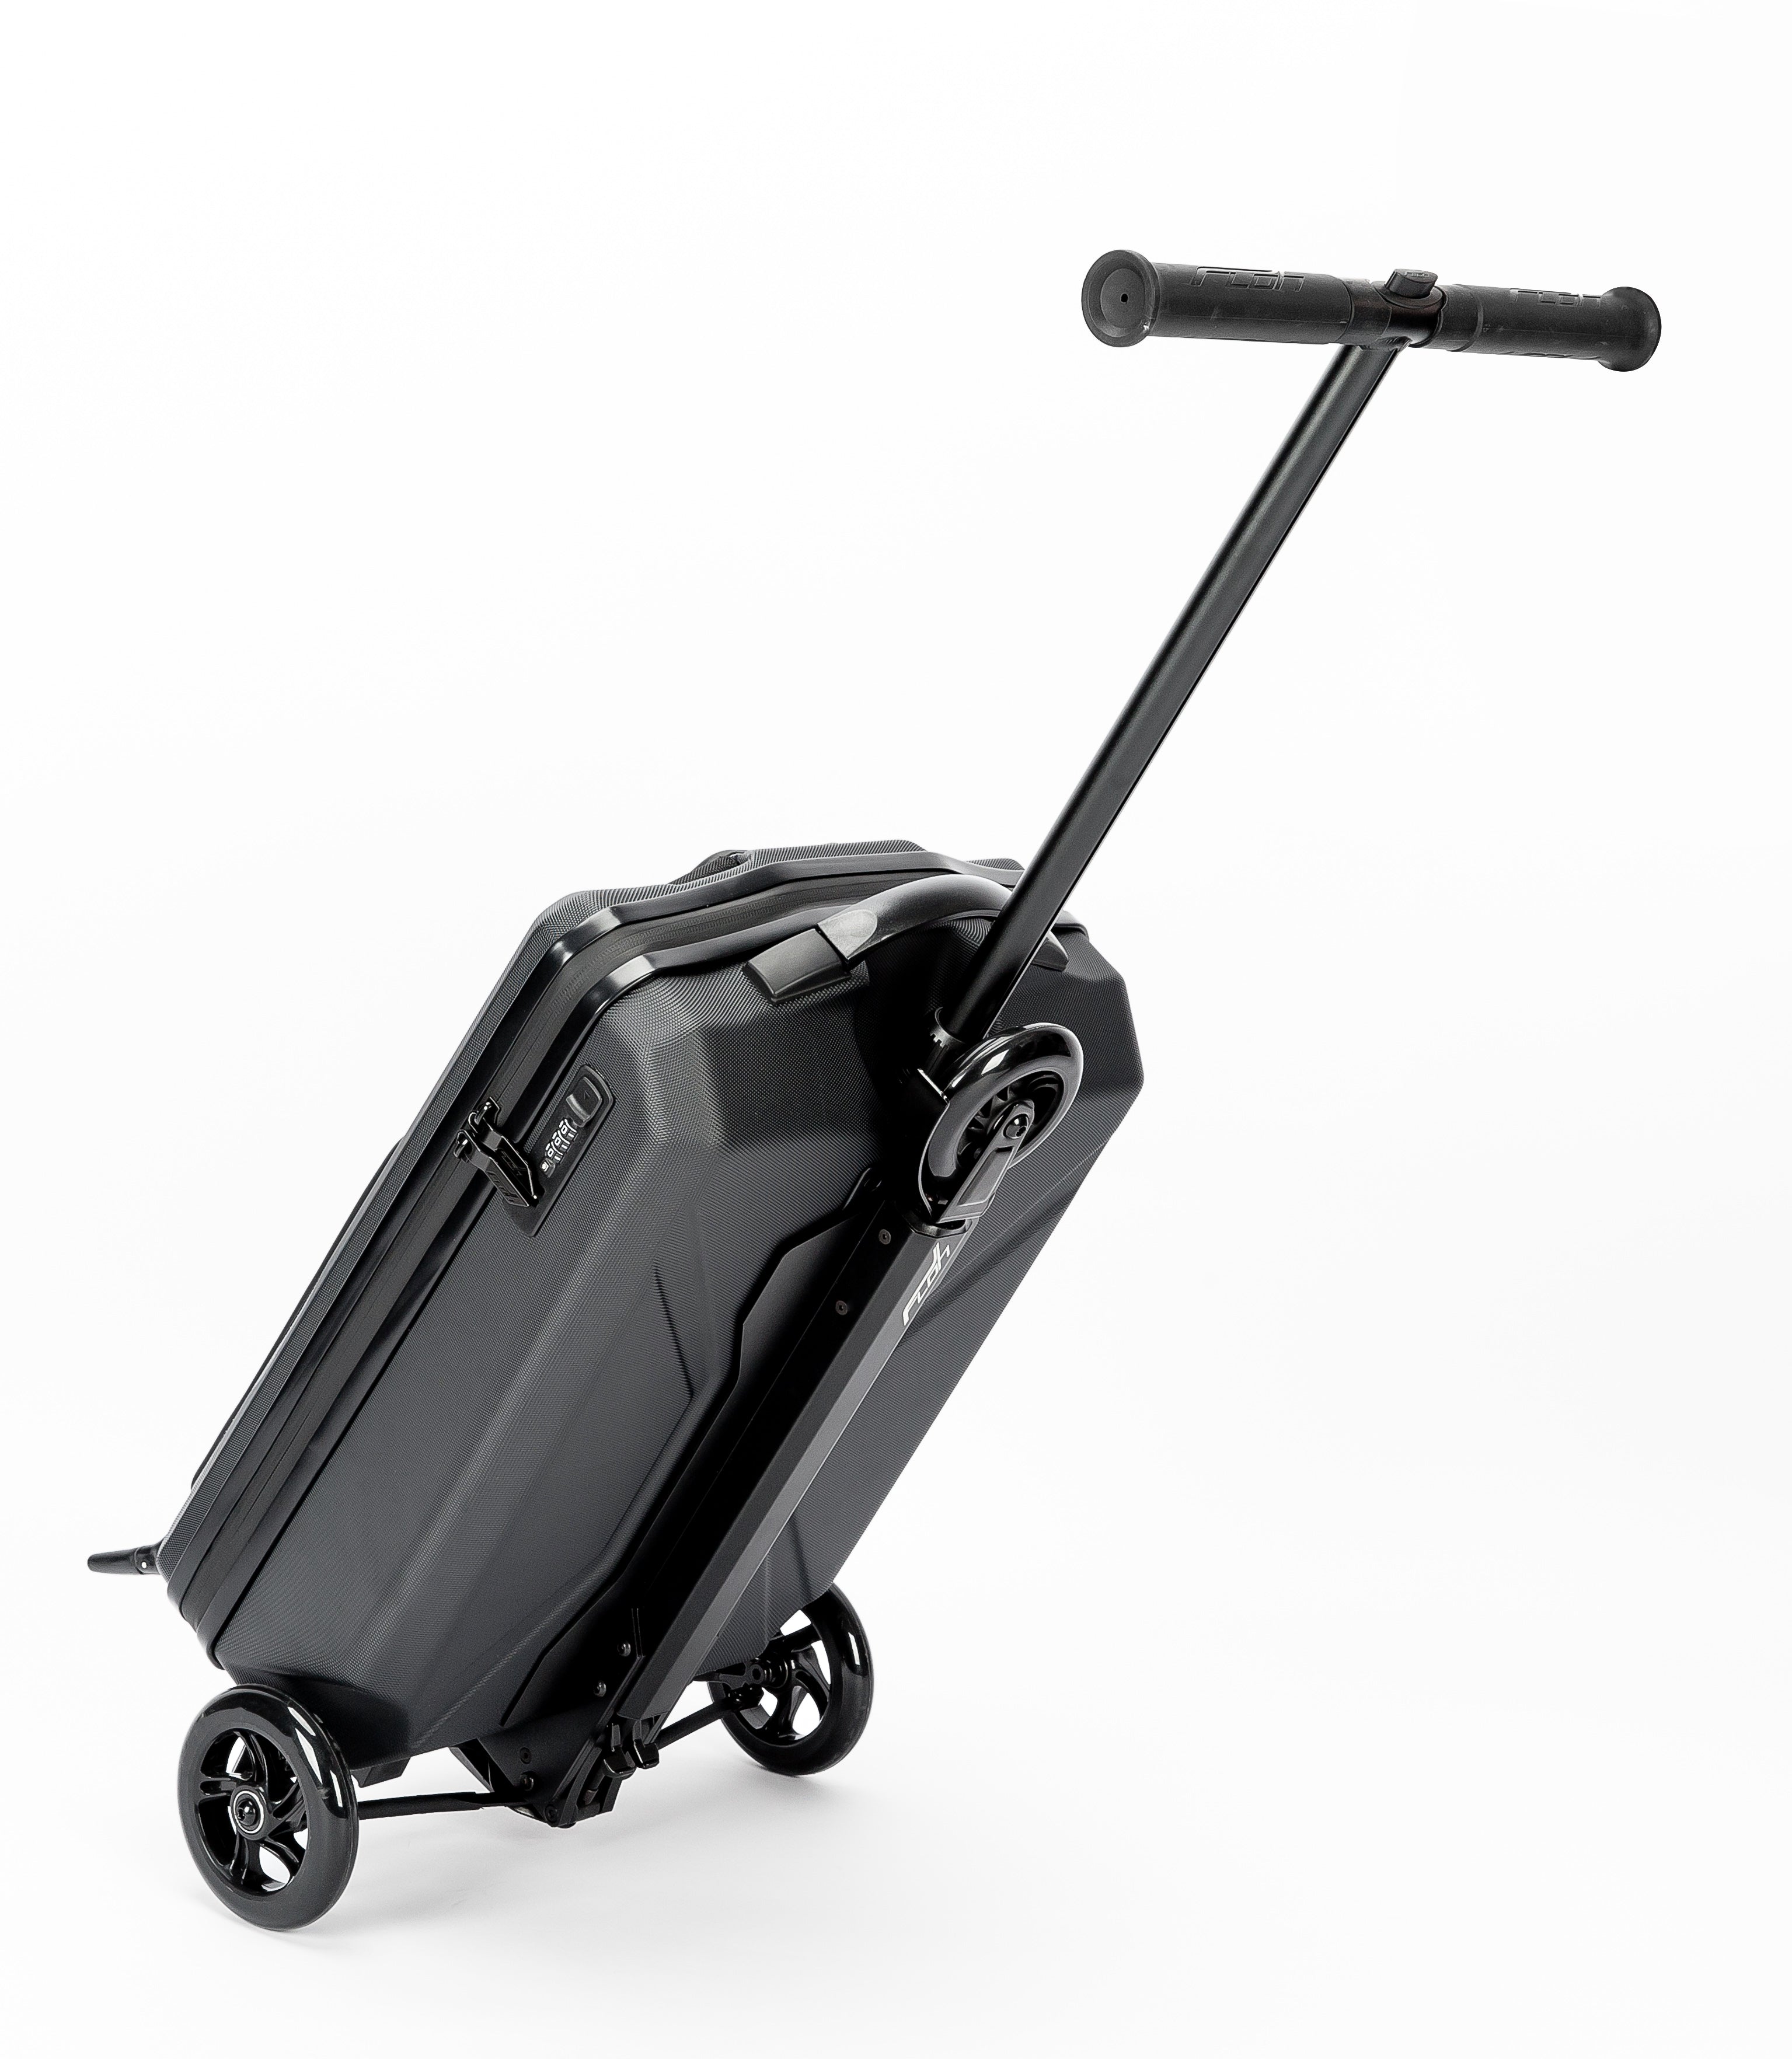 BLACK SCOOTER WITH SUITCASE SHAPE 5